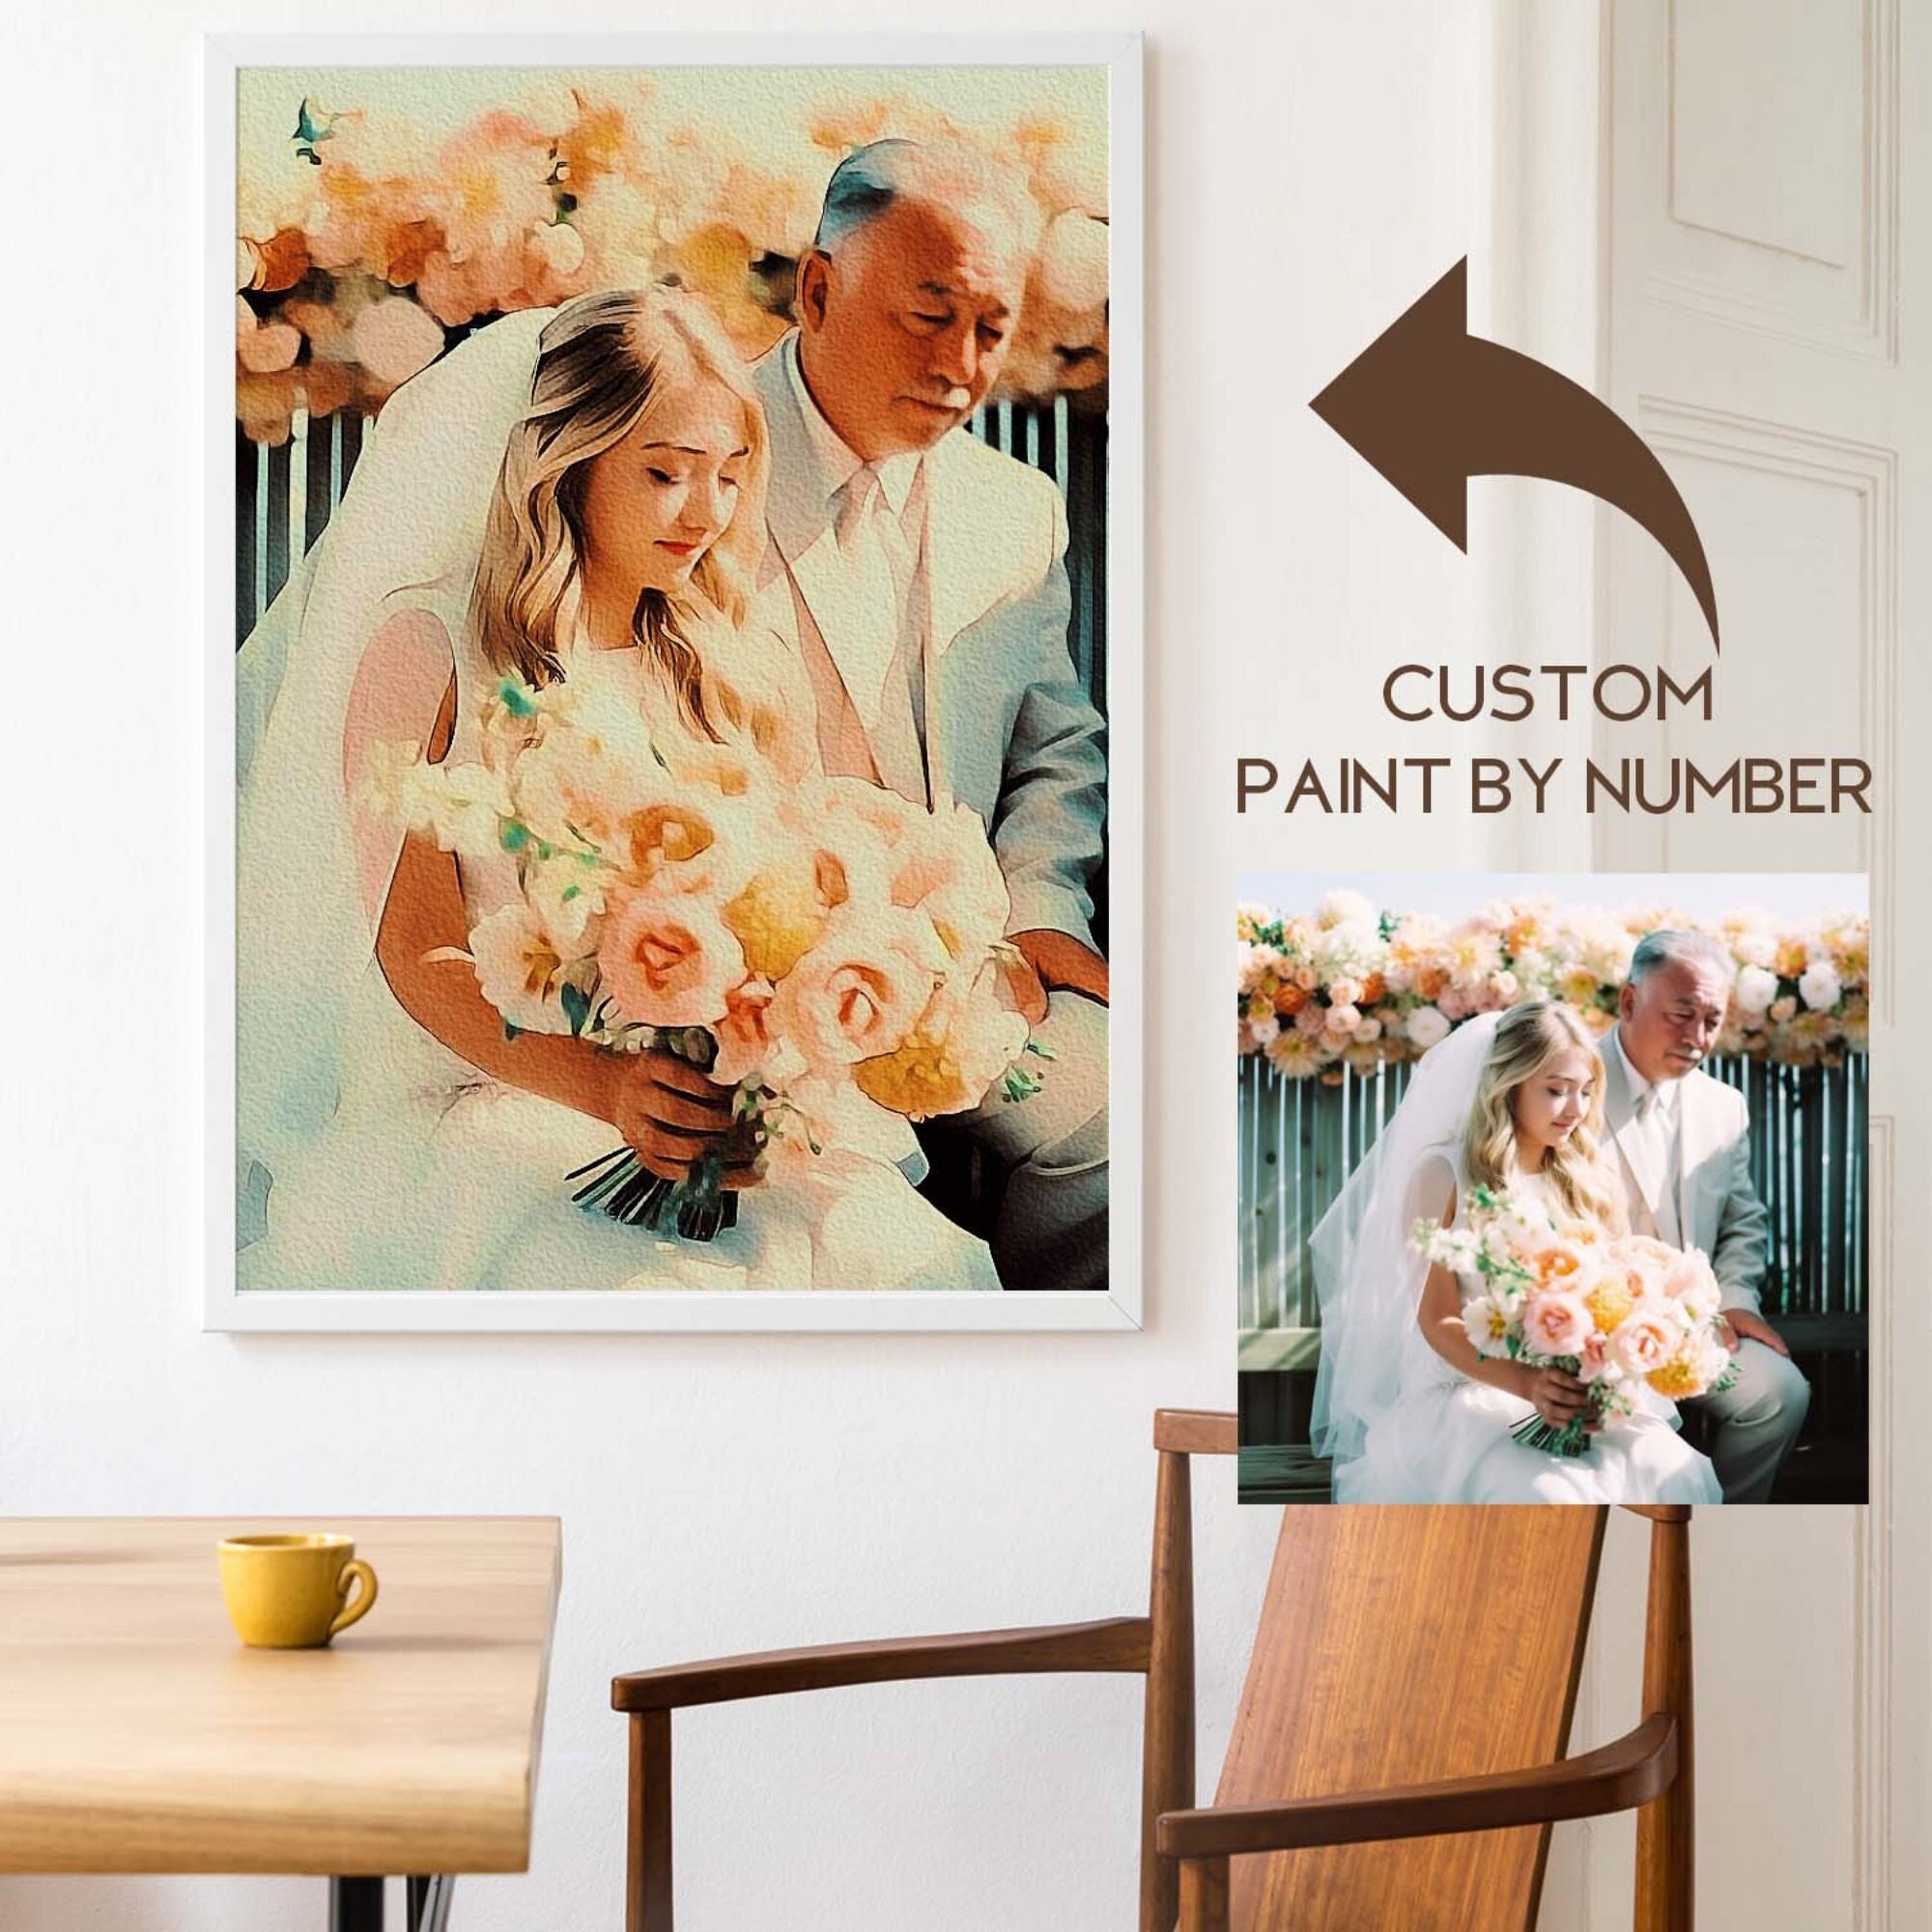 Custom Paint by Number Personalized Paint by Number Kit Adult, Customized  DIY Paint by Numbers Set, Paint Your Photos, Create Your Own Art 